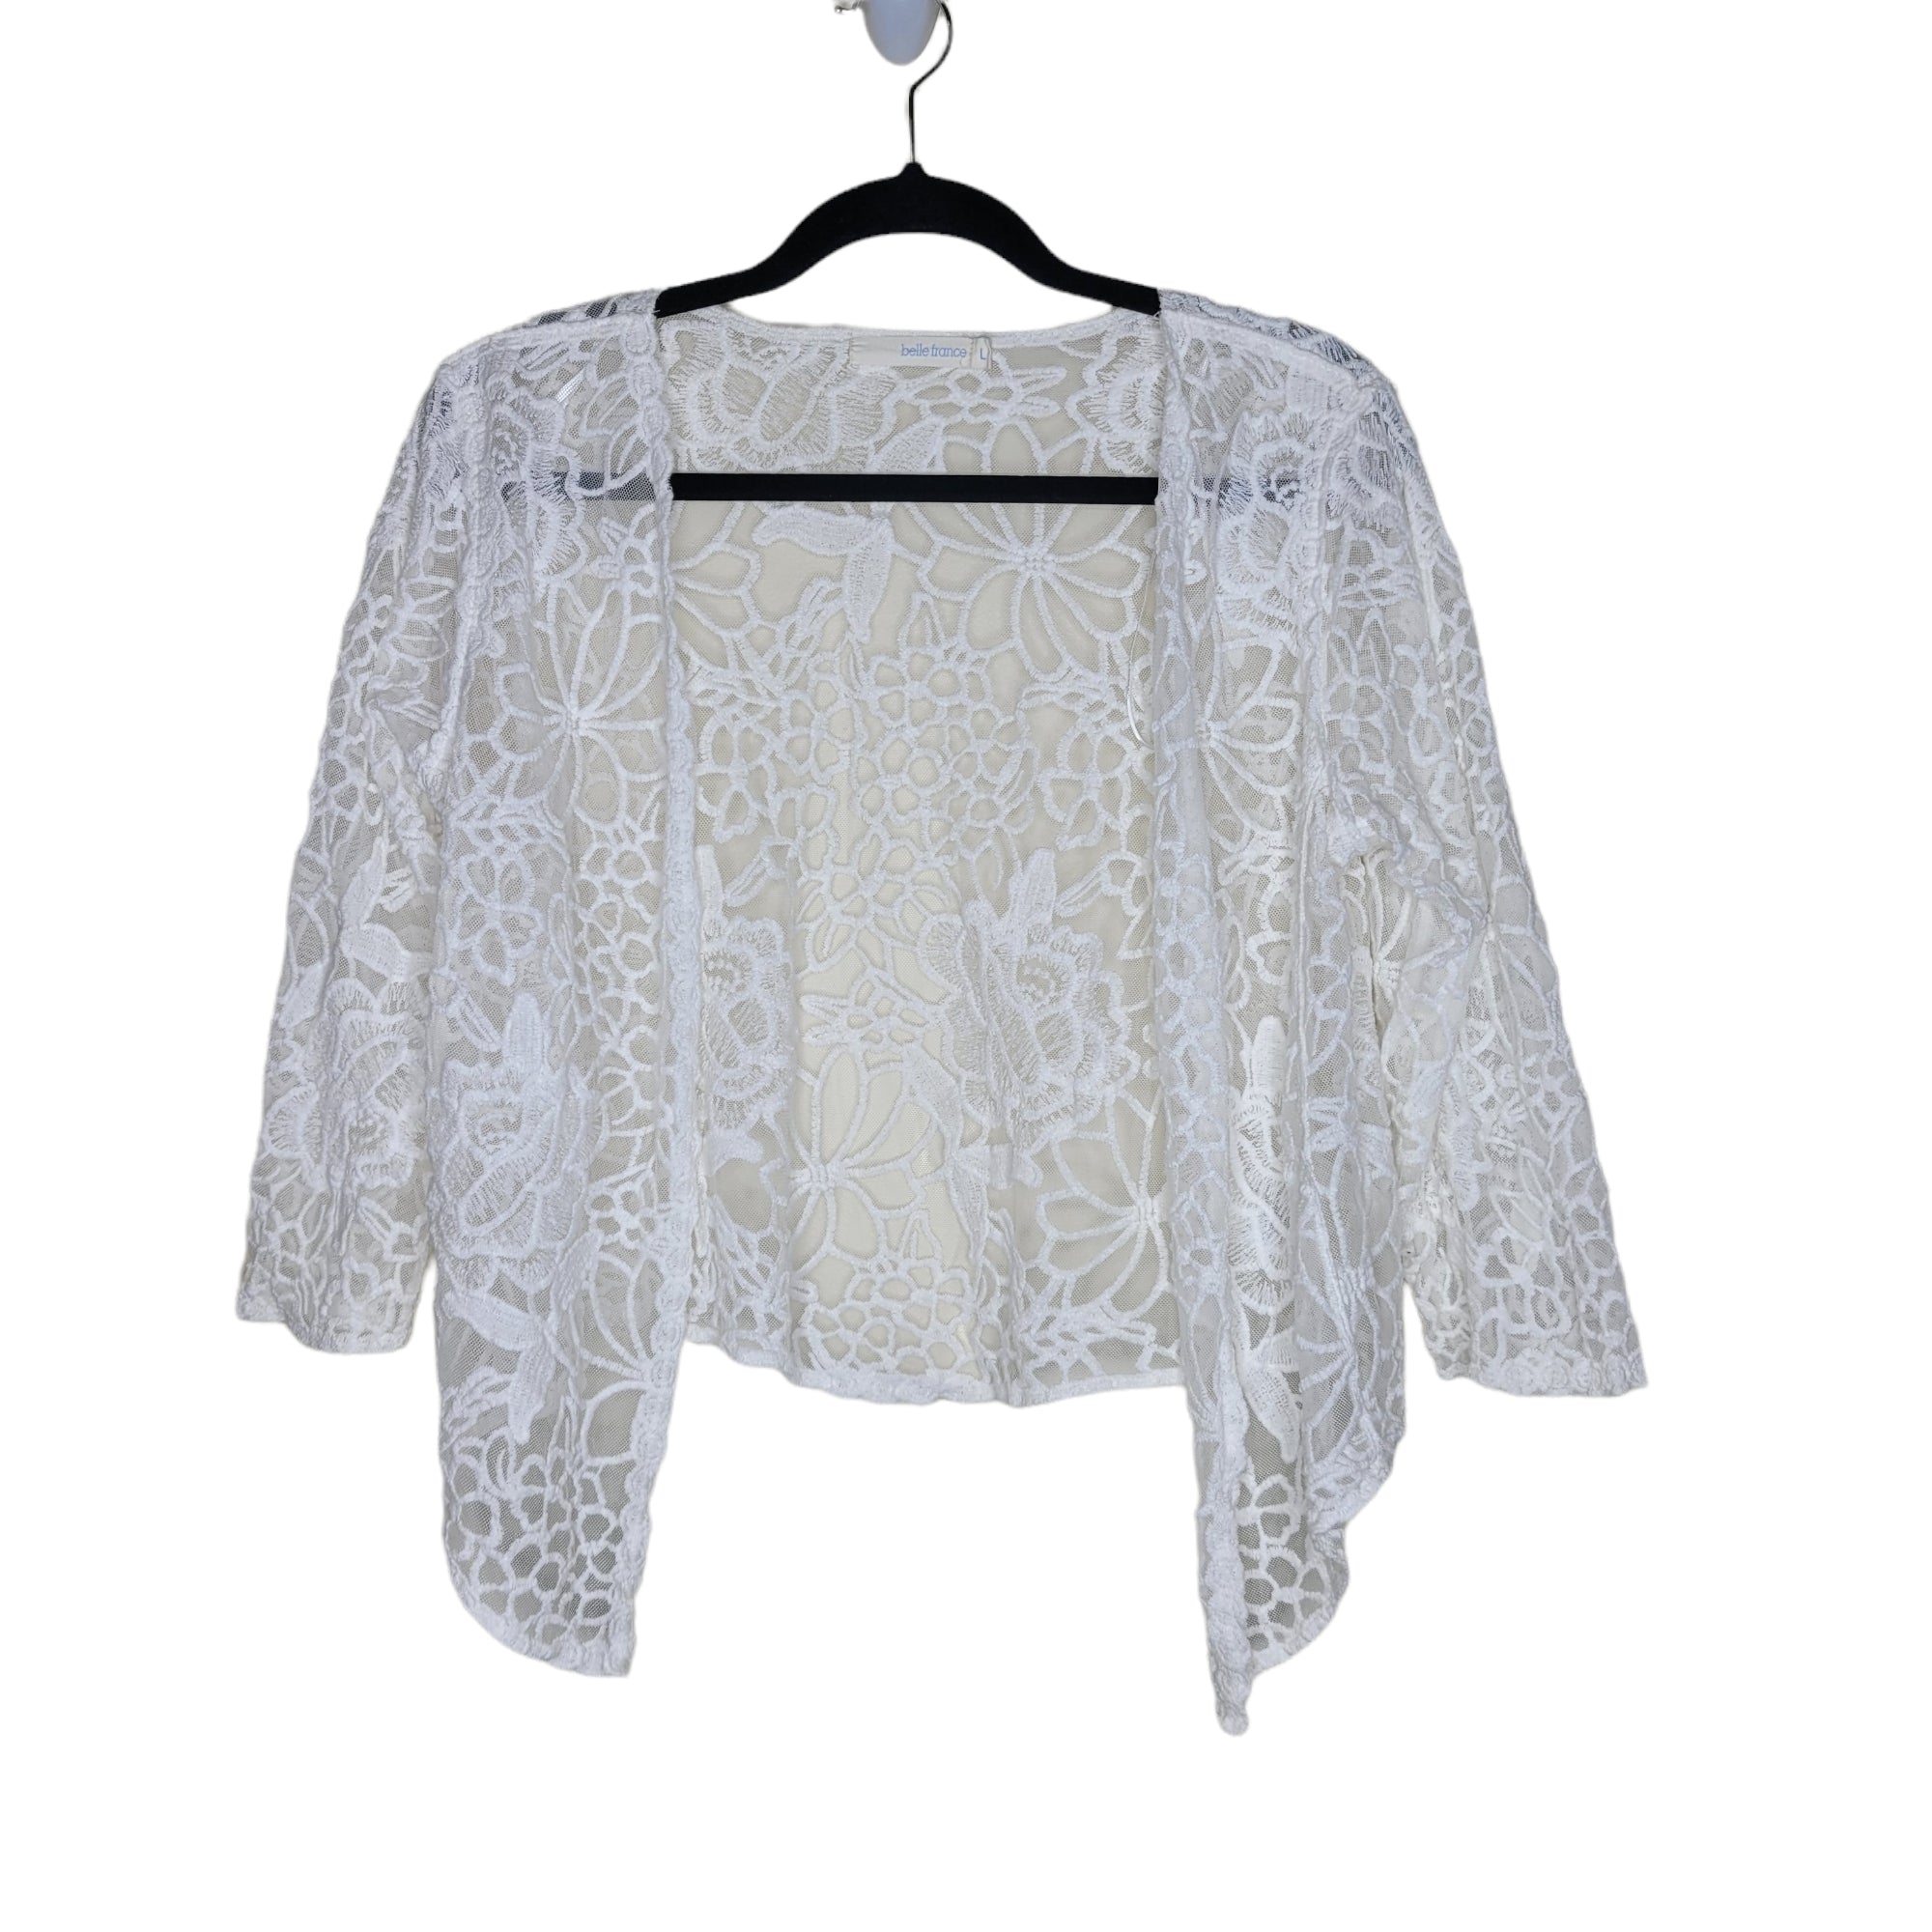 Belle France White Embroidered Lace Short Sleeve Open Cardigan Size Large